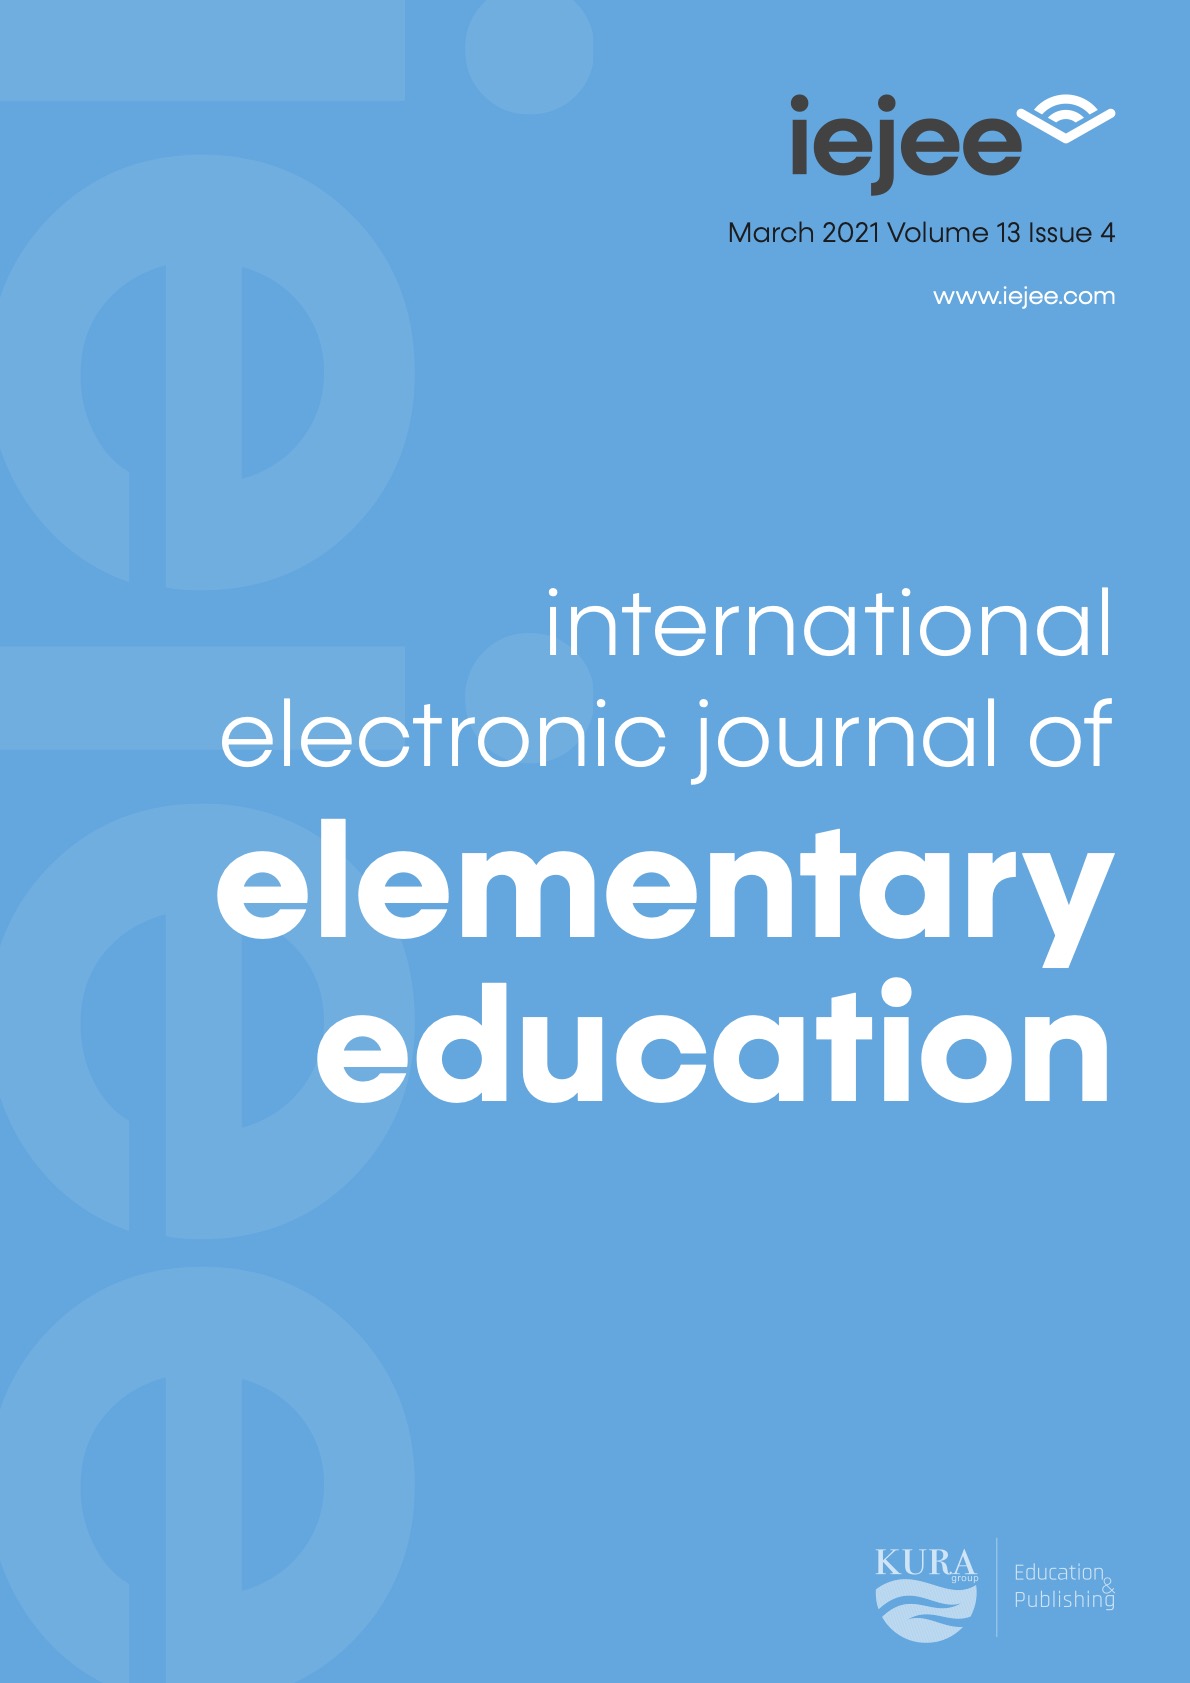 research paper on elementary education